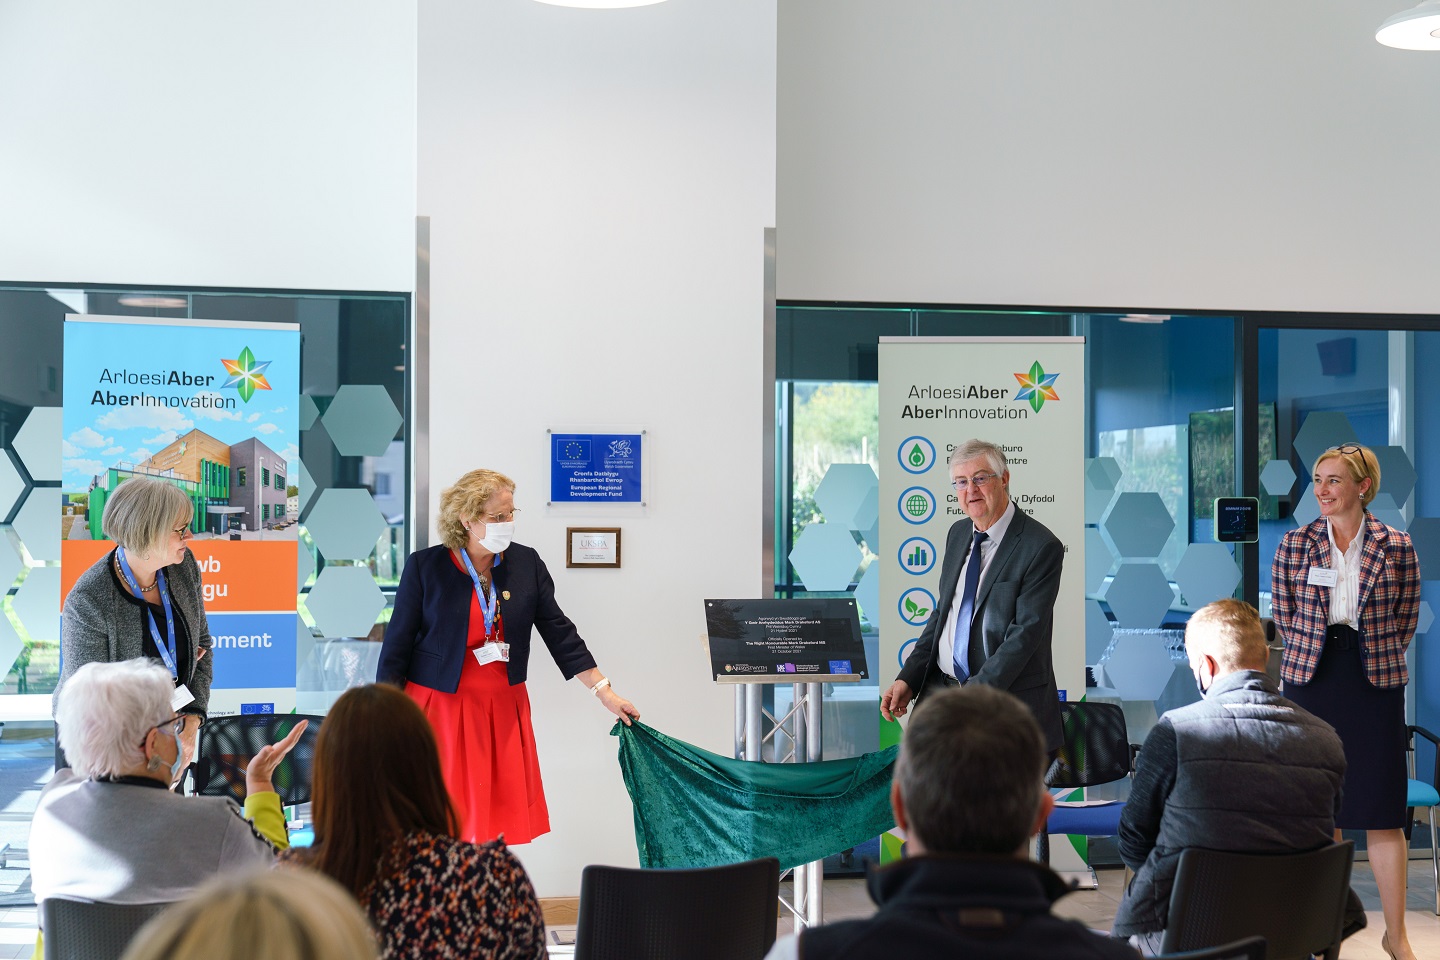 From left to Right: Professor Melanie Welham, Professor Elizabeth Treasure, the Right Honourable Mark Drakeford MS, First Minister of Wales, Dr Rhian Hayward MBE